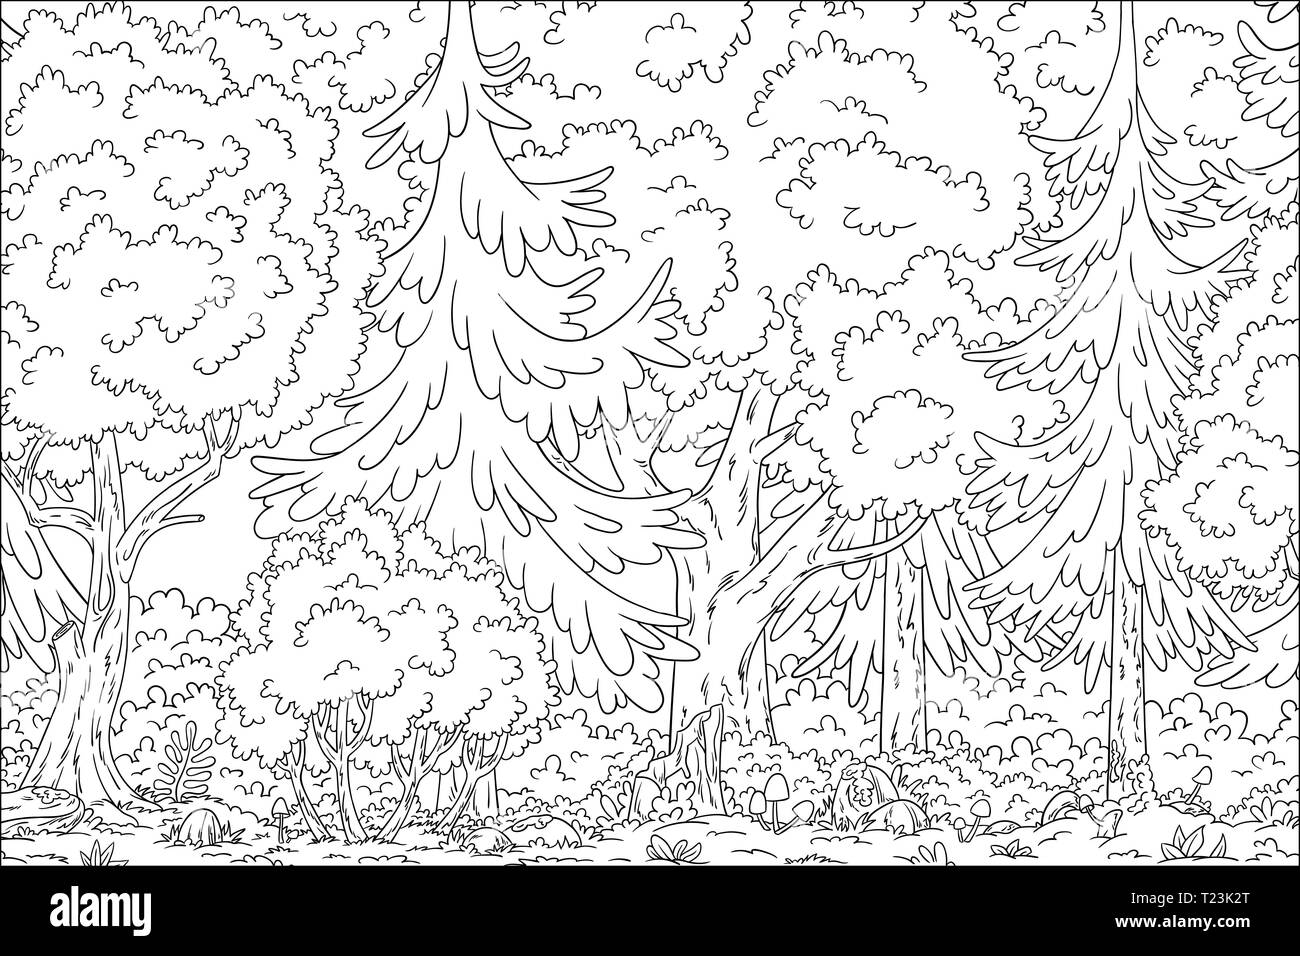 Coloring book landscape. Hand draw vector illustration with separate layers. Stock Vector